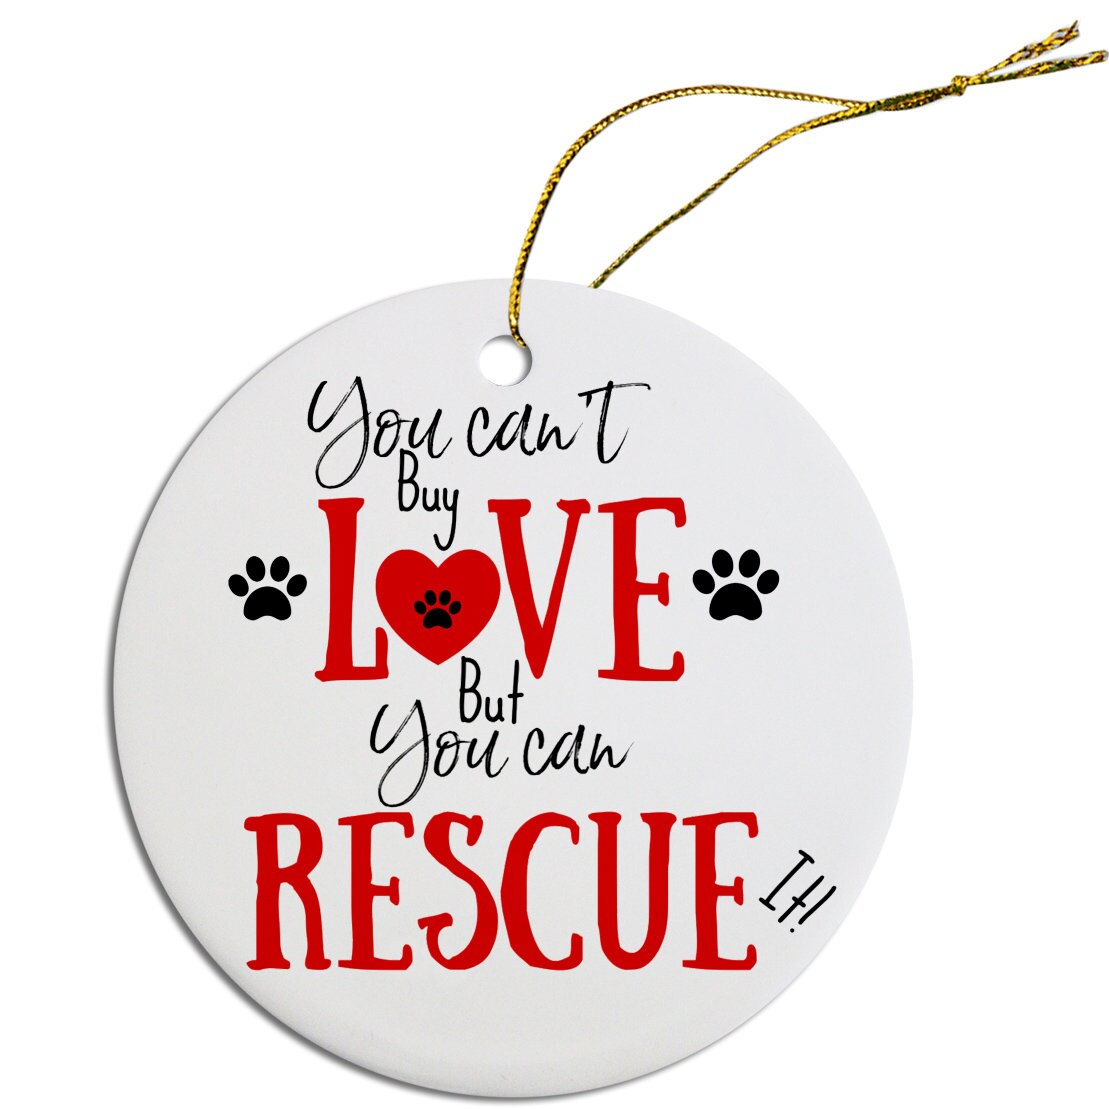 Holiday Fun Christmas Ornaments (Choose from 4 designs: Rescue Mom, Rescue Dad, Who Rescued Who?, You Can't Buy Love, But You Can Rescue It)